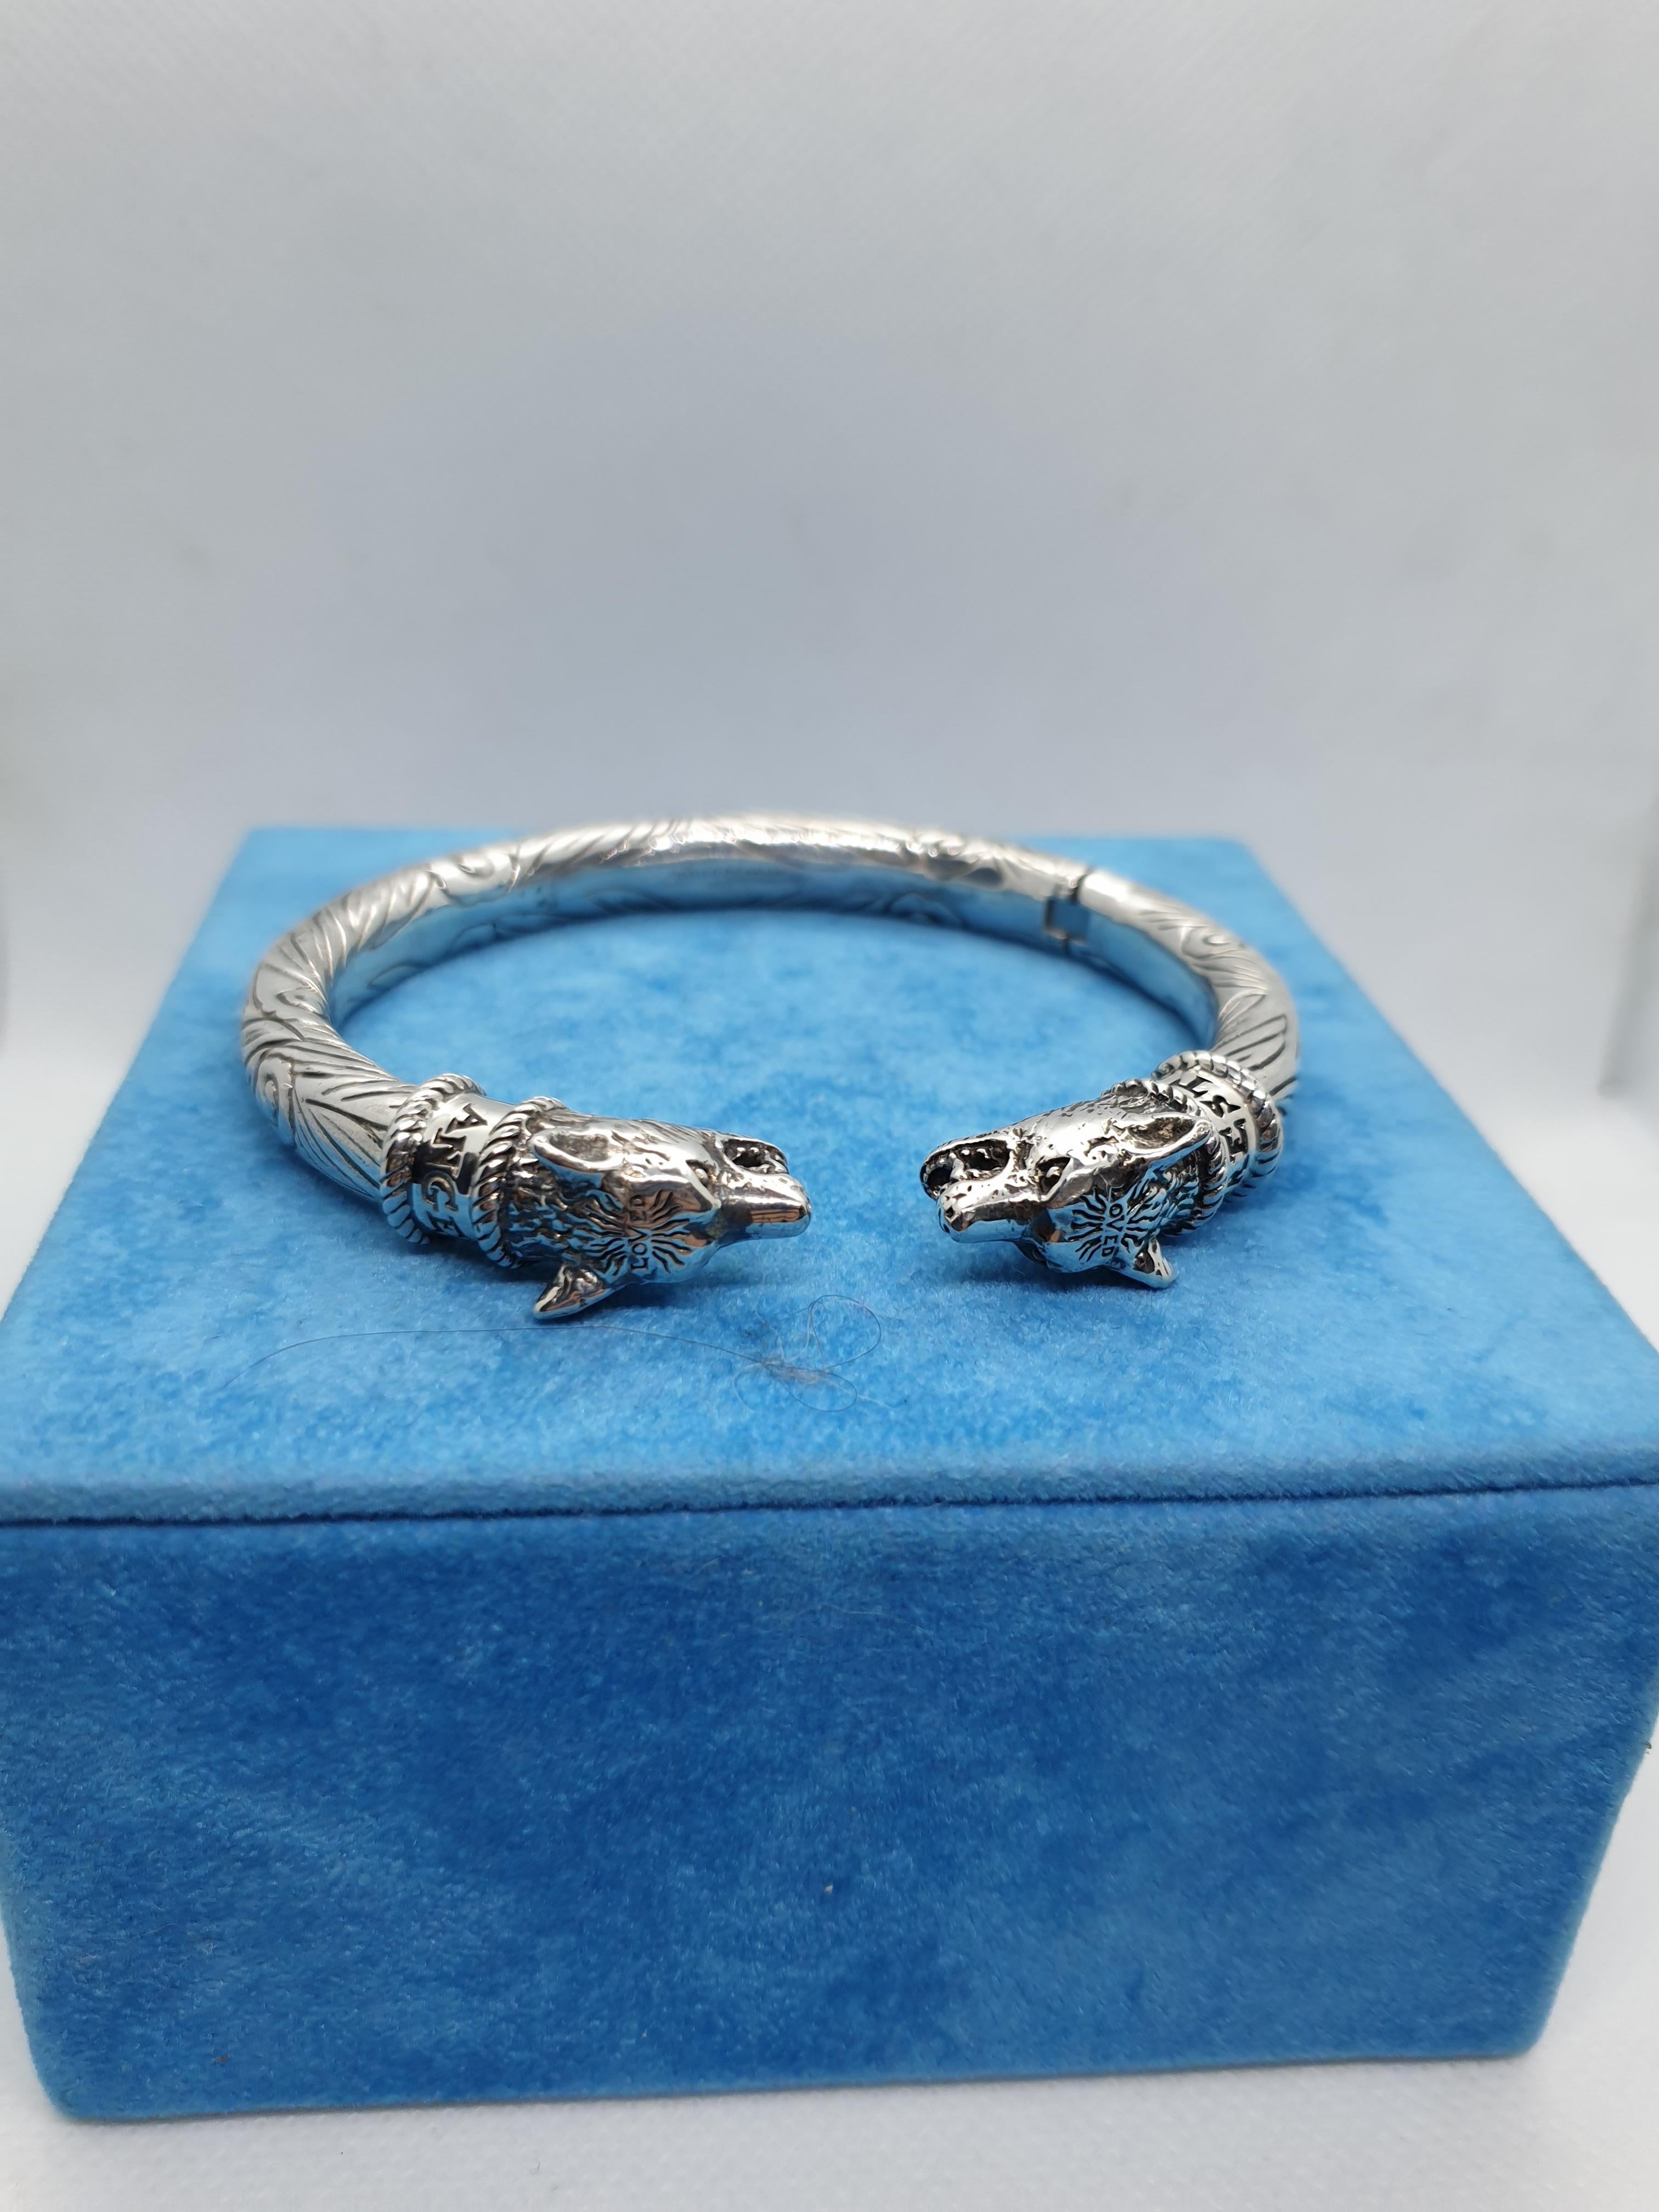 Gucci jewellery bracelet sterling silver.
Love anger forest with wolves heads model.
Size 19
Very beautiful condition

The Spring Summer 2018 fashion show sets a surreal stage for mystical details, creatures and references that enrich the esoteric